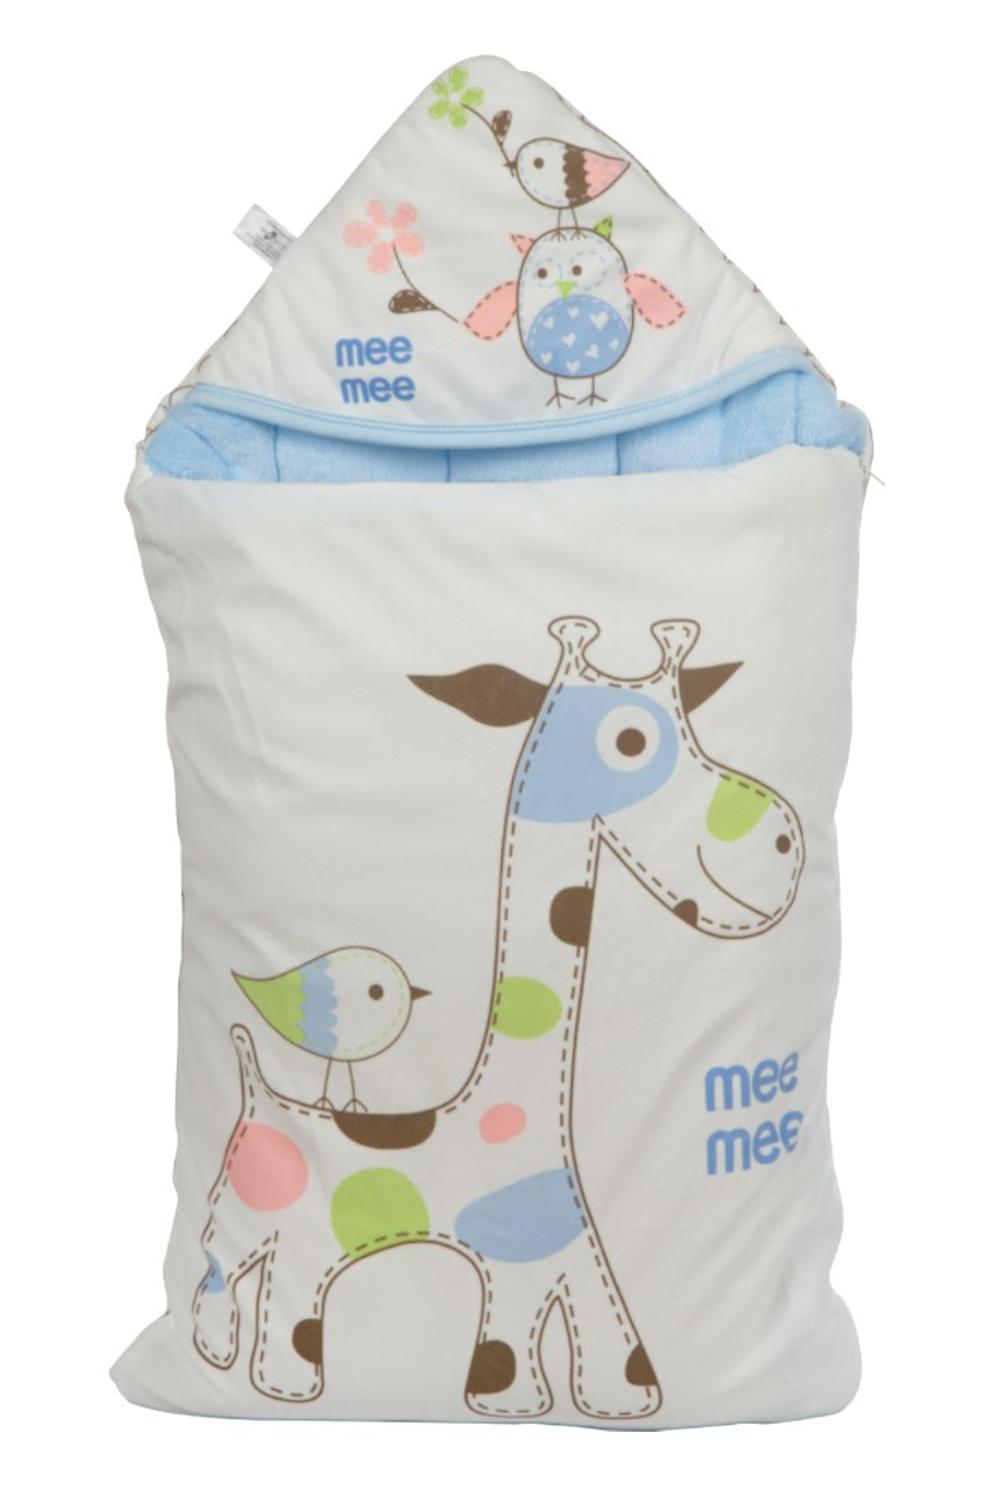 Mee Mee 3 in 1 Baby Carry Nest with Sleeping Bag and Mattress for Babies (Blue)